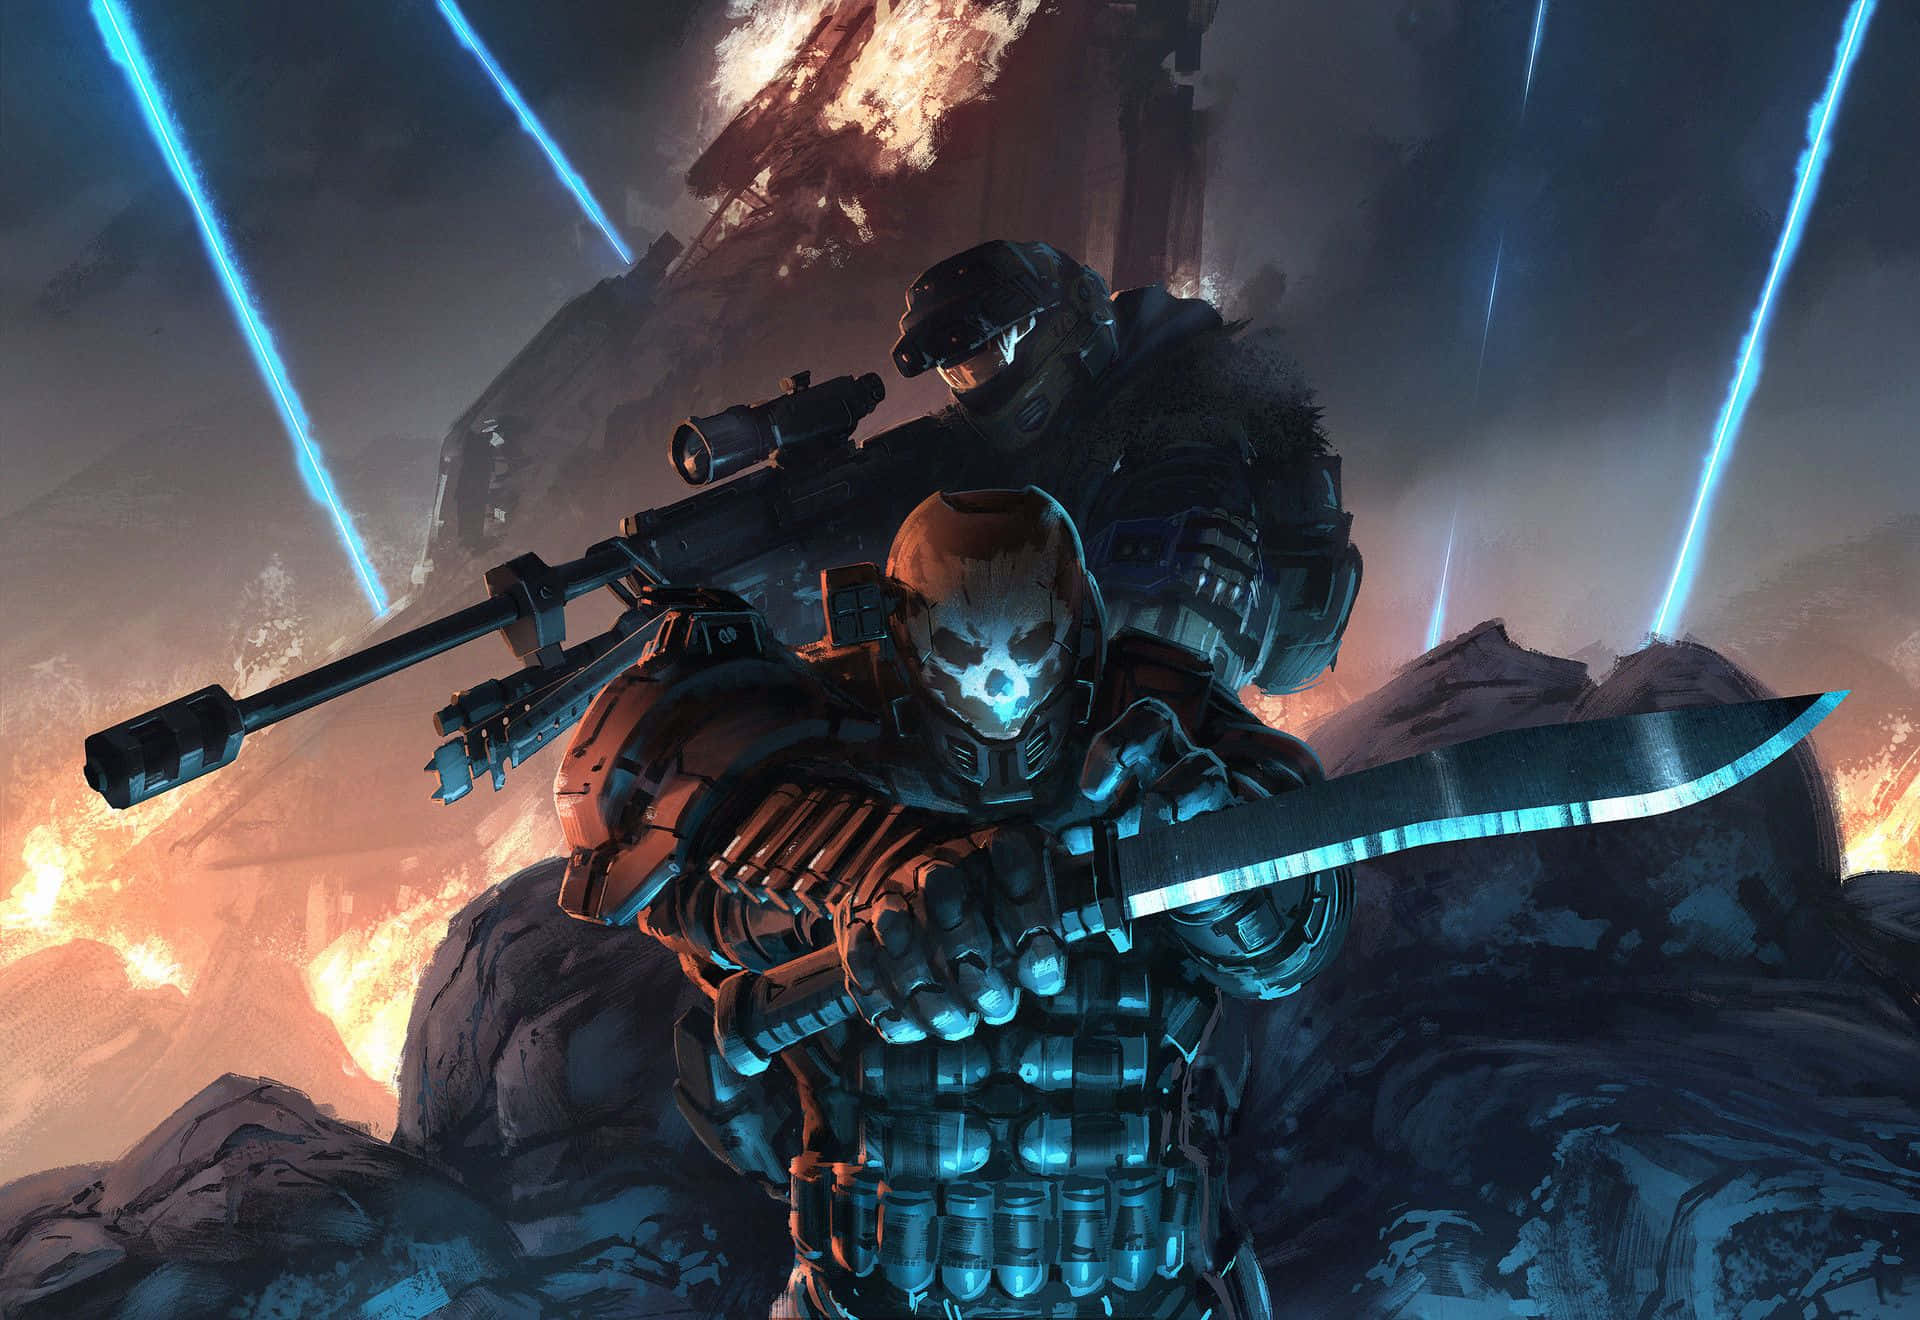 Download Emile A239, the merciless Spartan in Halo Reach Wallpaper ...